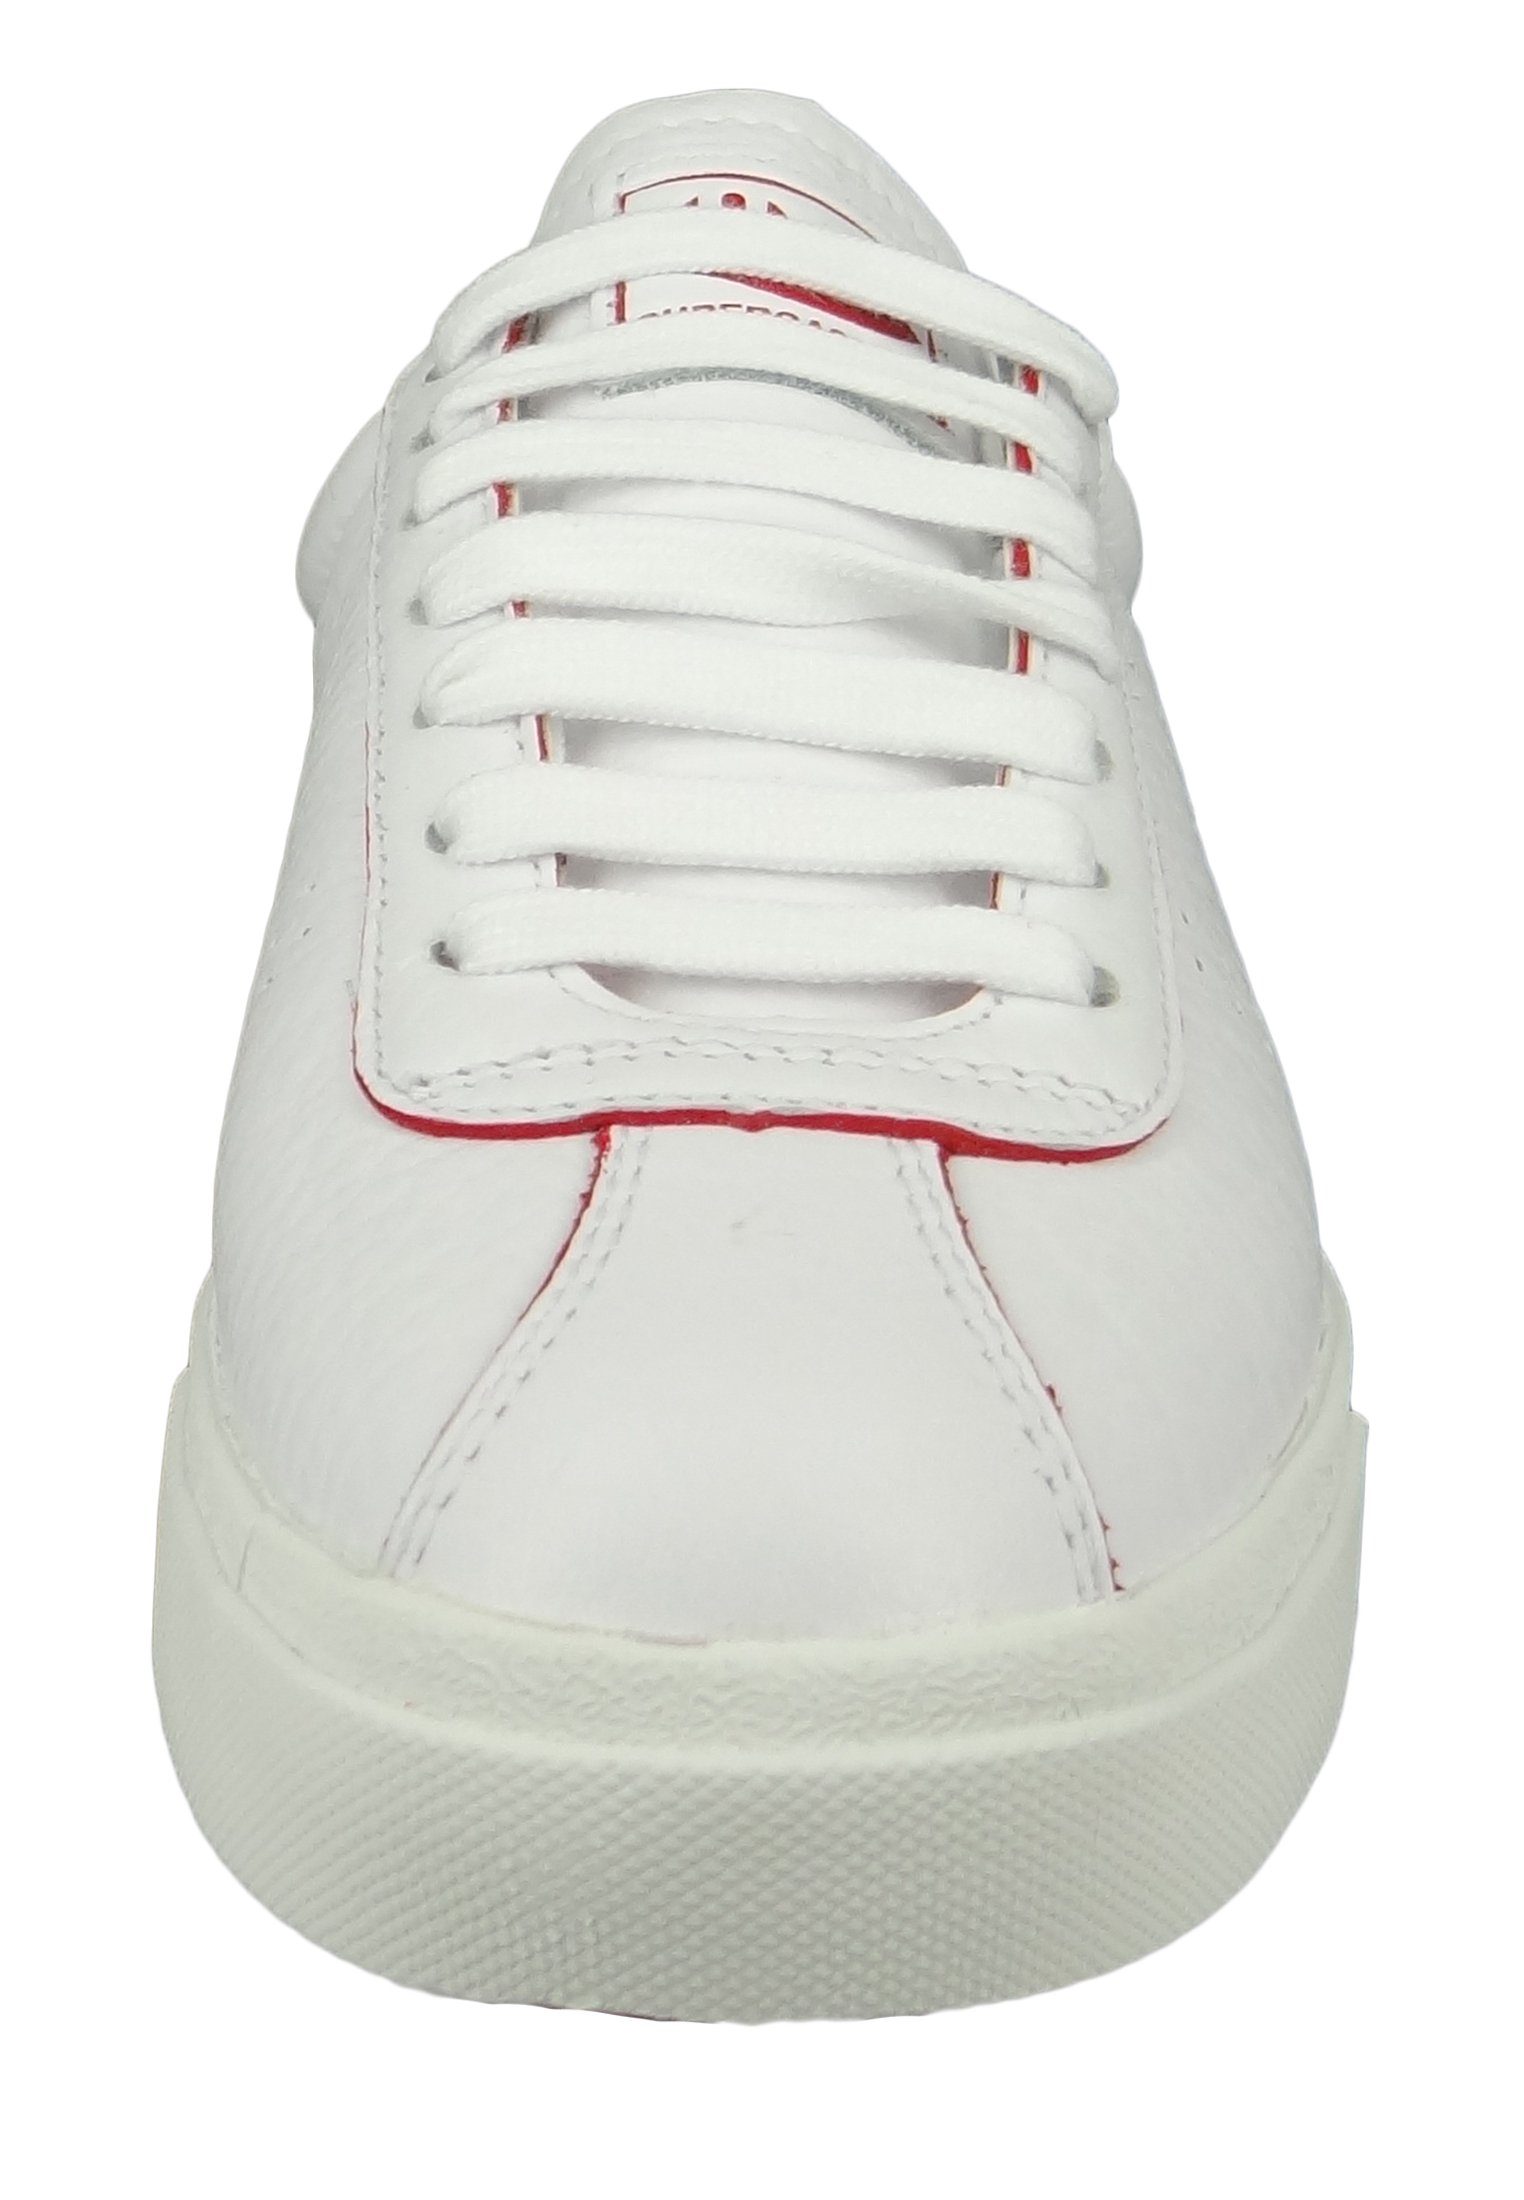 Superga S111WRW Sneaker S Club Comfleau red White 2869 Flame Painted A1Z